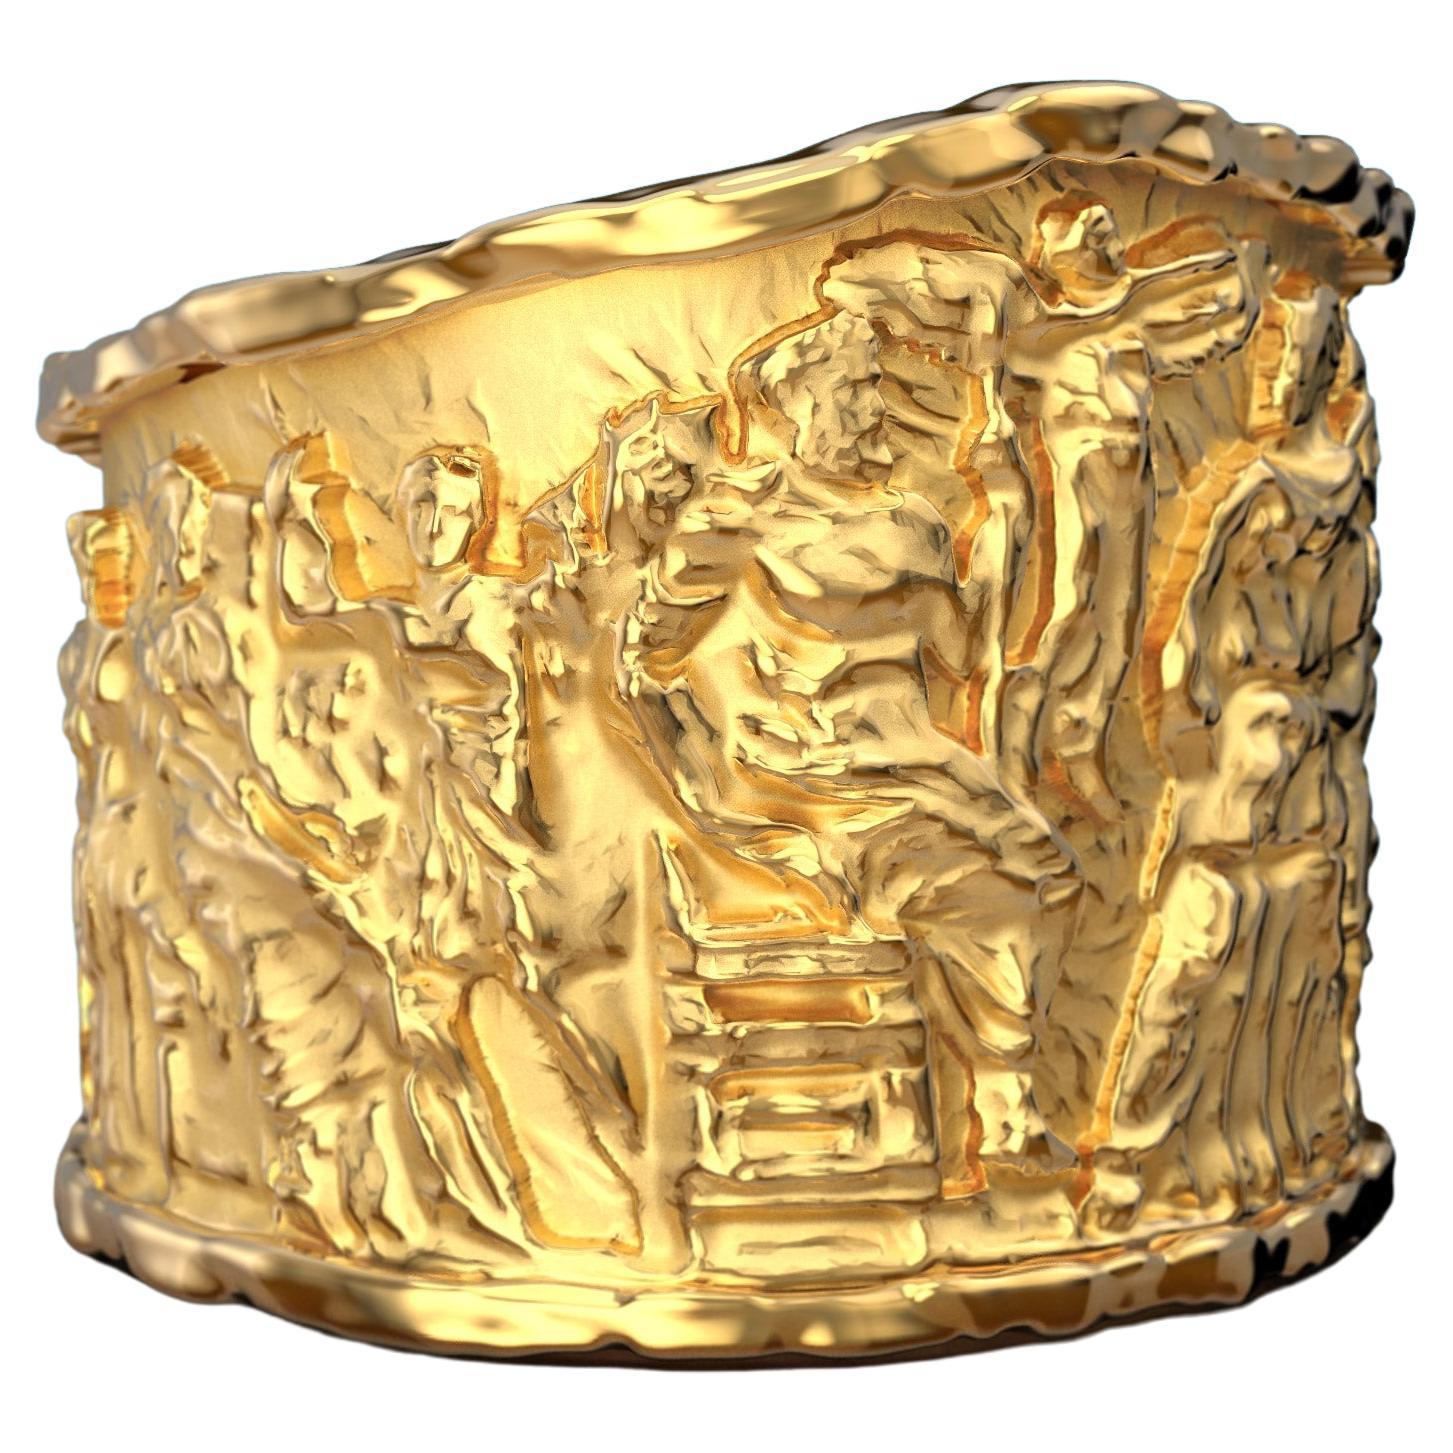 For Sale:  Ancient Style Solid Gold Ring, Pediments of the Parthenon Ring, 14K Gold Ring